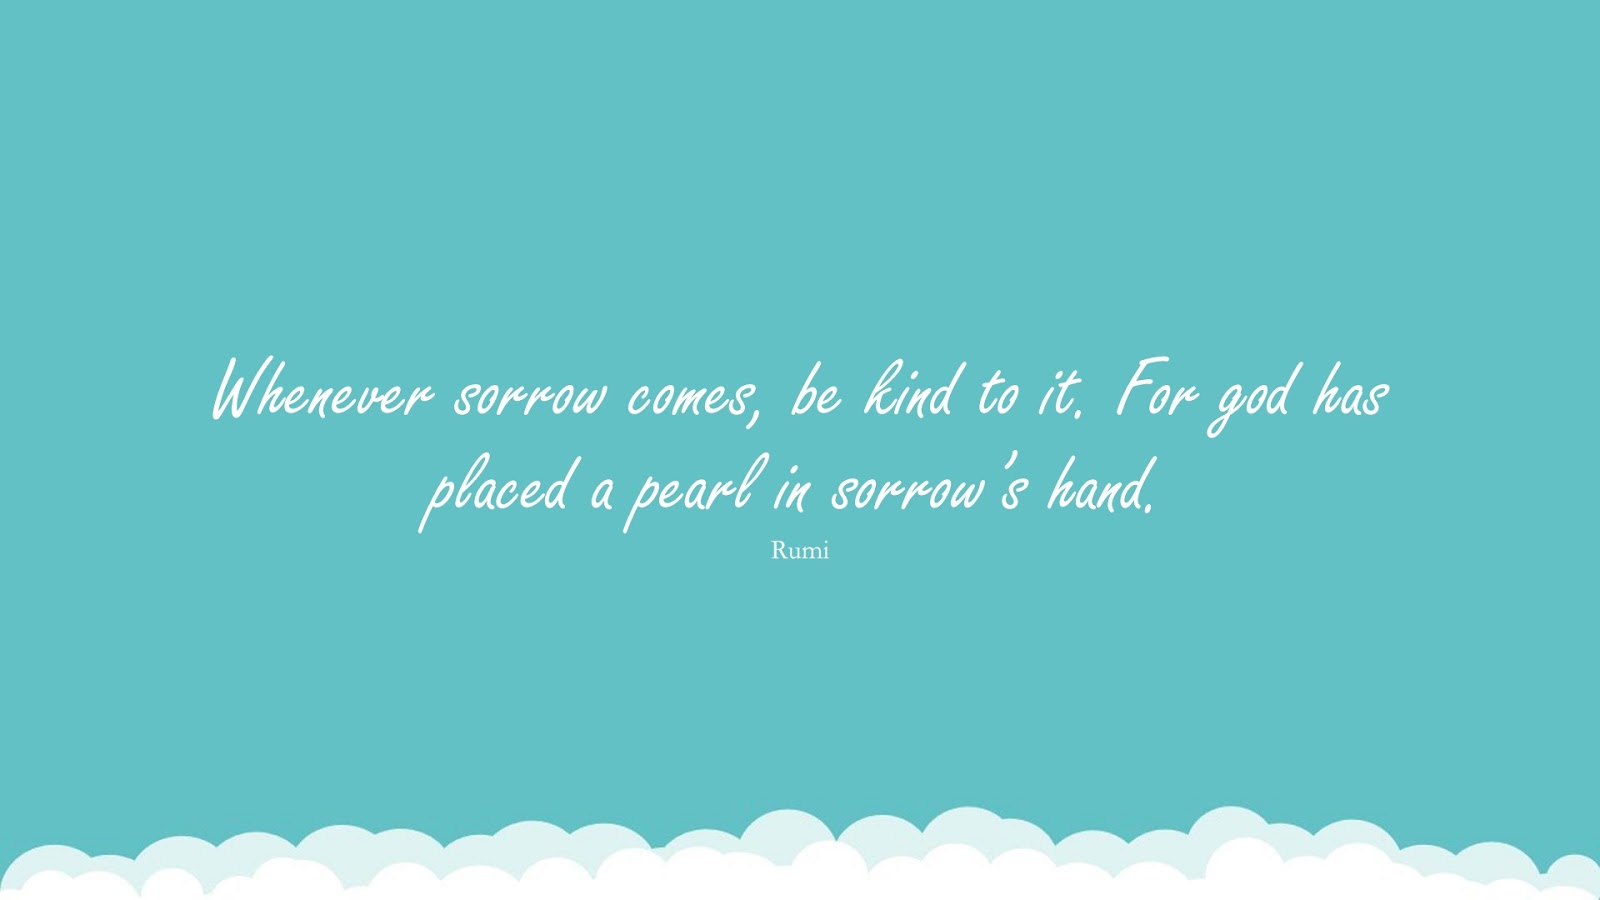 Whenever sorrow comes, be kind to it. For god has placed a pearl in sorrow’s hand. (Rumi);  #RumiQuotes